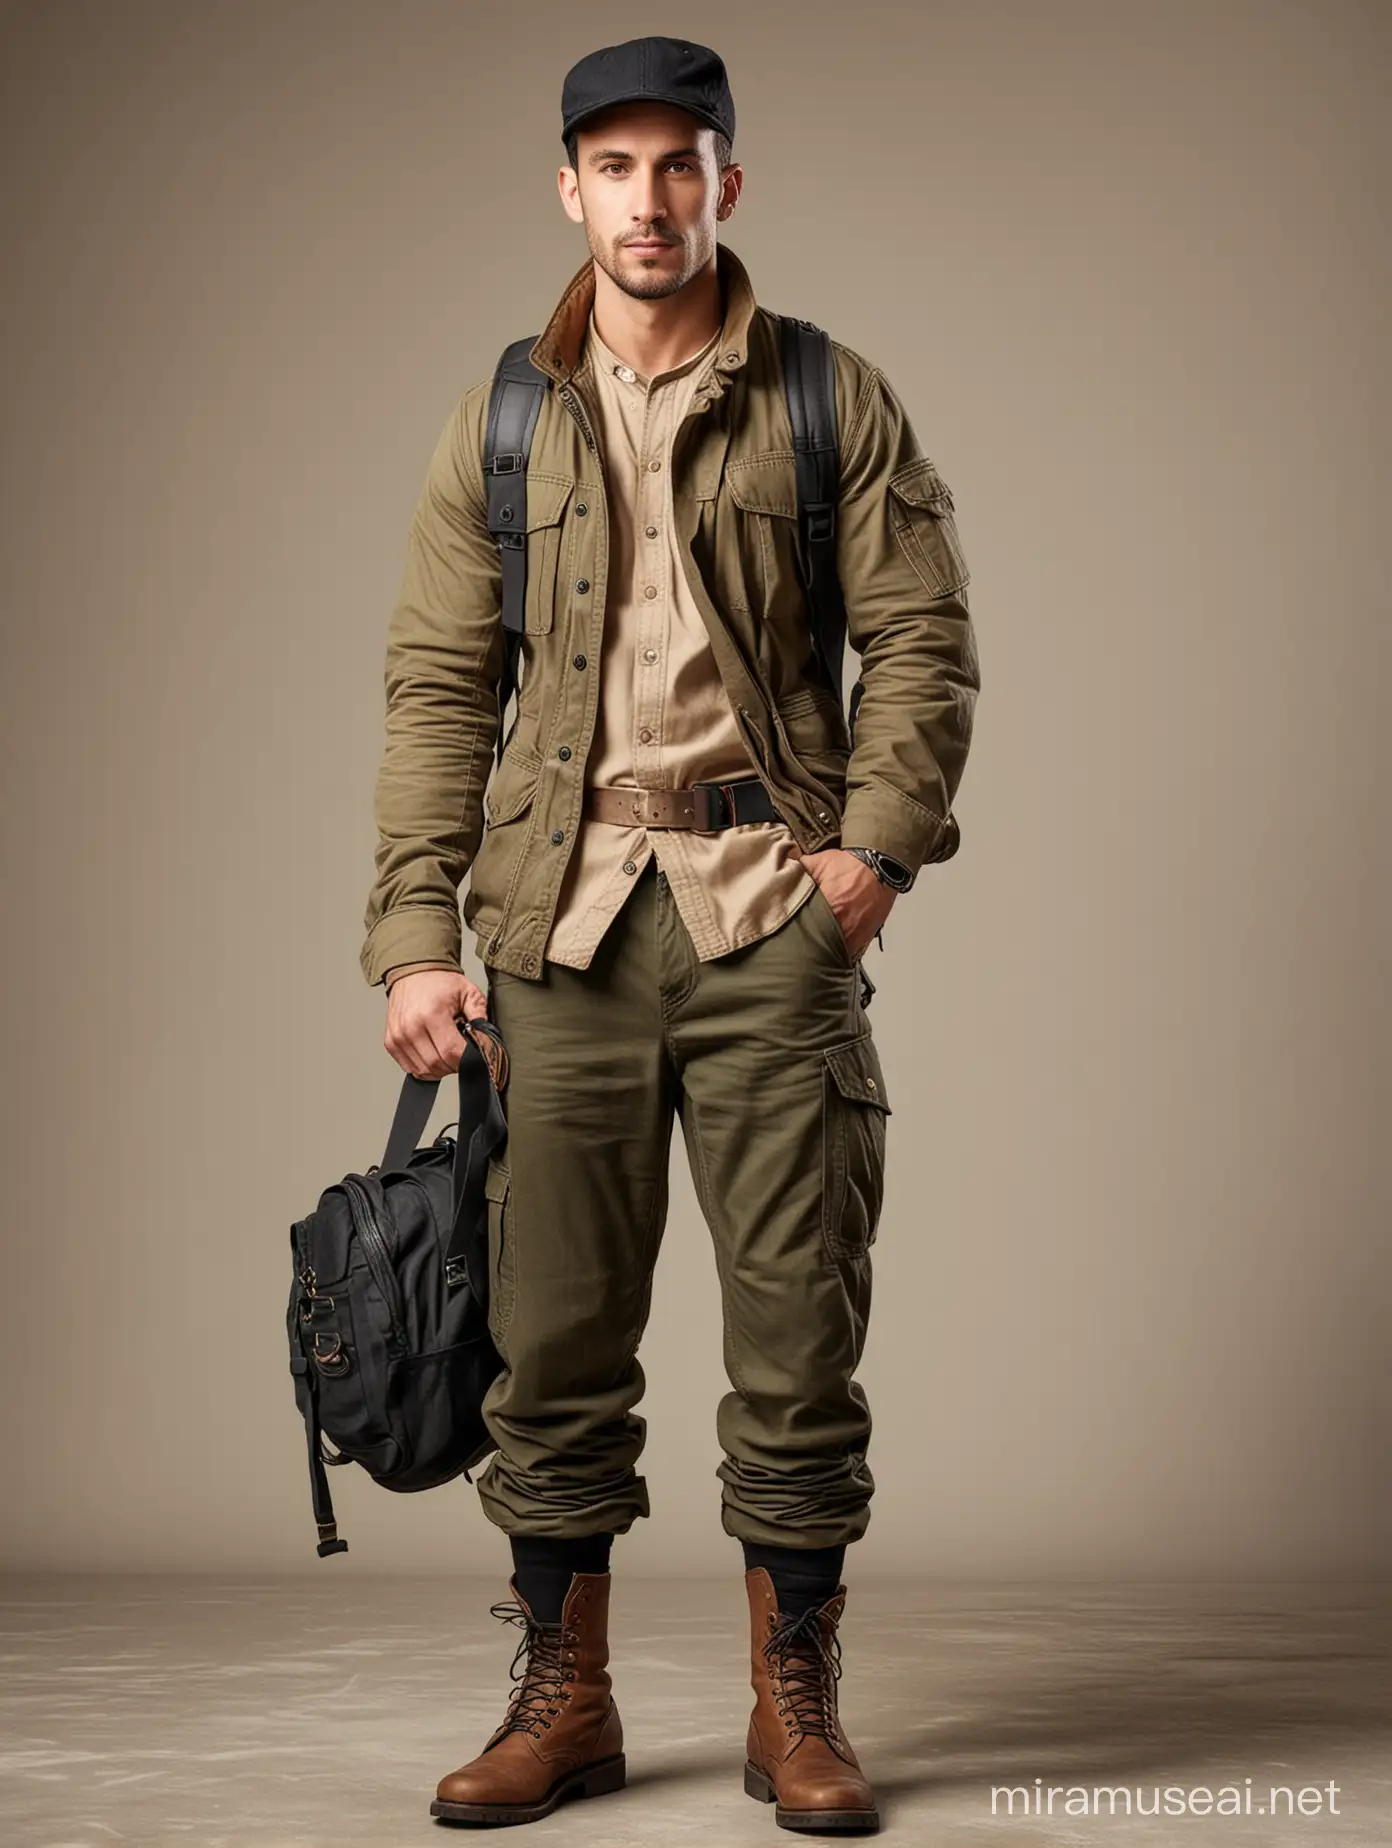 30 year old man, war, fit body, wear cOMBAT trousers and canvas military khaki jacket, brown leather combat boot, black baseball hat, backpack, full body, head to toe
